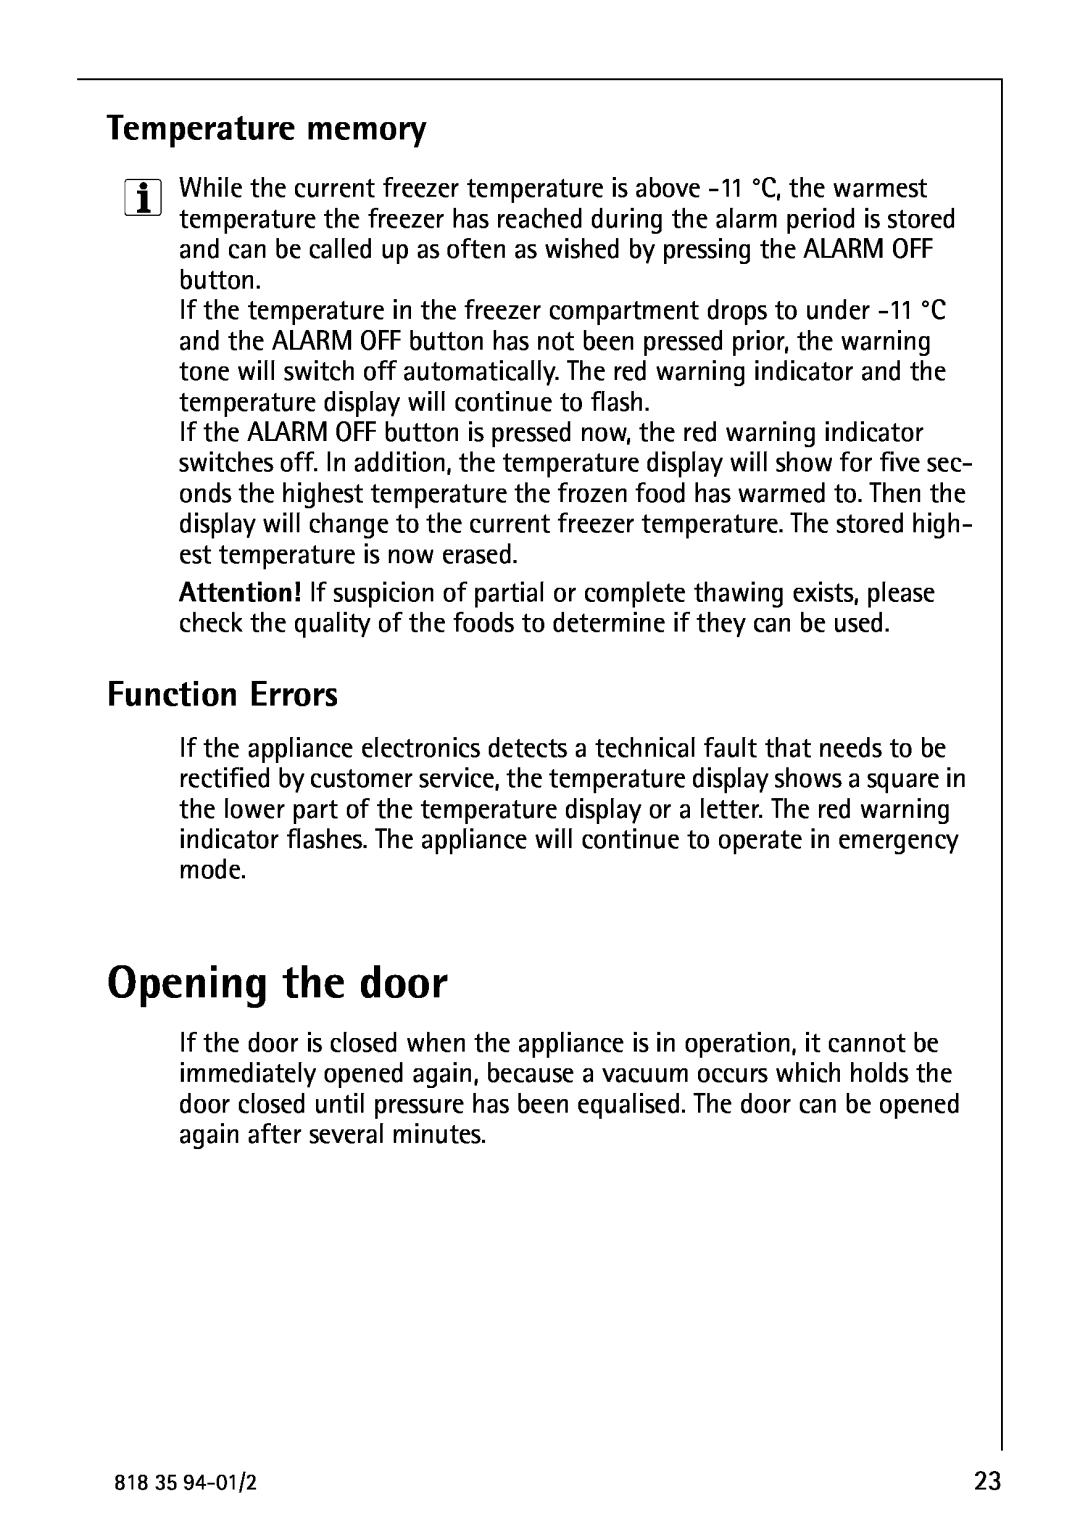 Electrolux U31462 operating instructions Opening the door, Temperature memory, Function Errors 